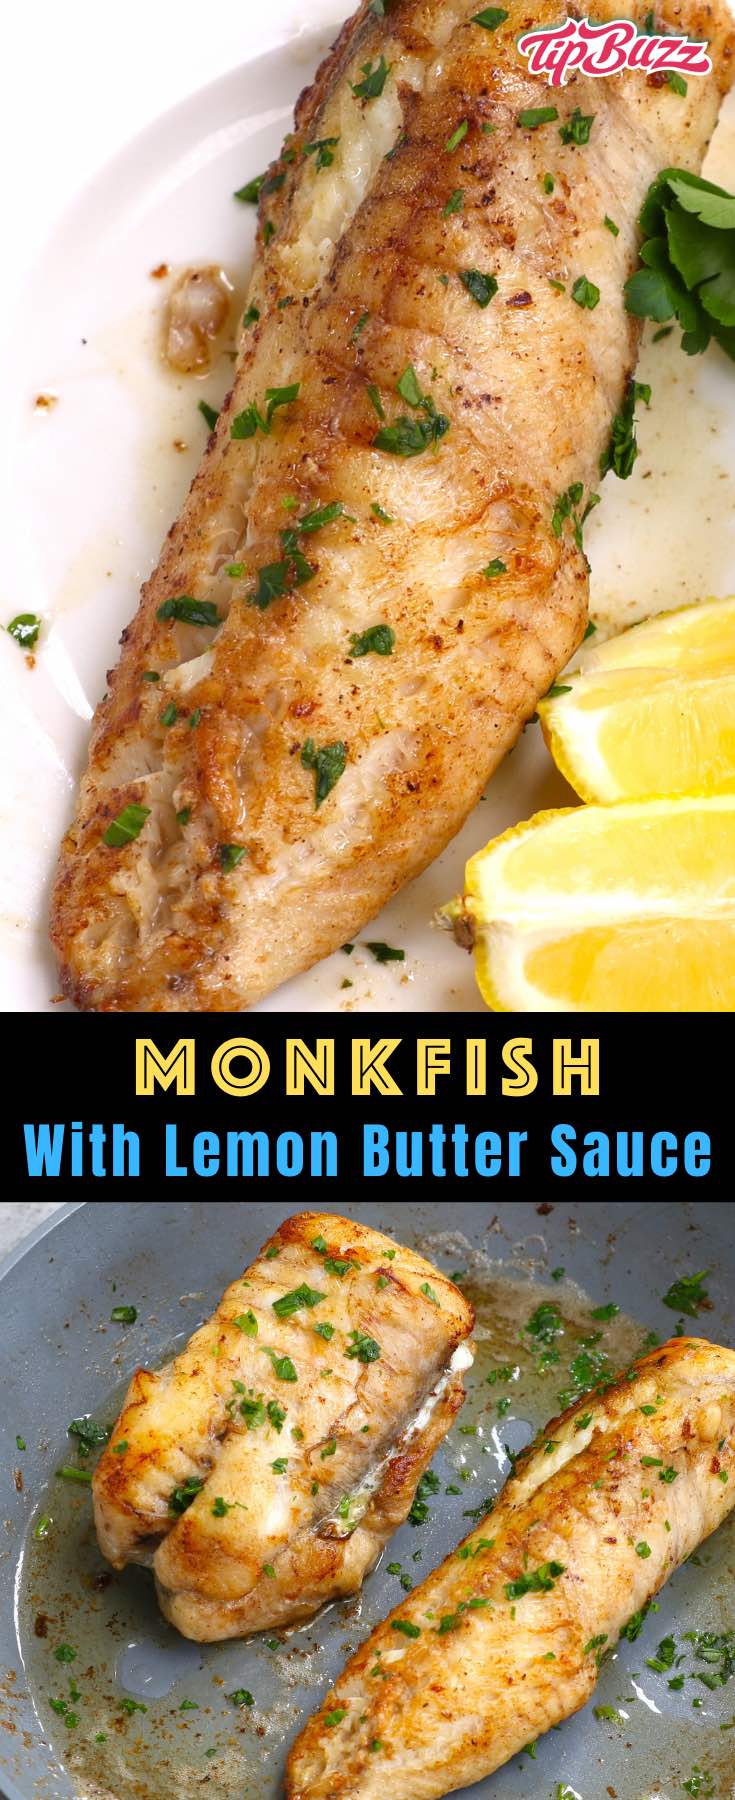 Monkfish is a delicious seafood choice that you can have on your dinner table in just 20 minutes! #monkfish